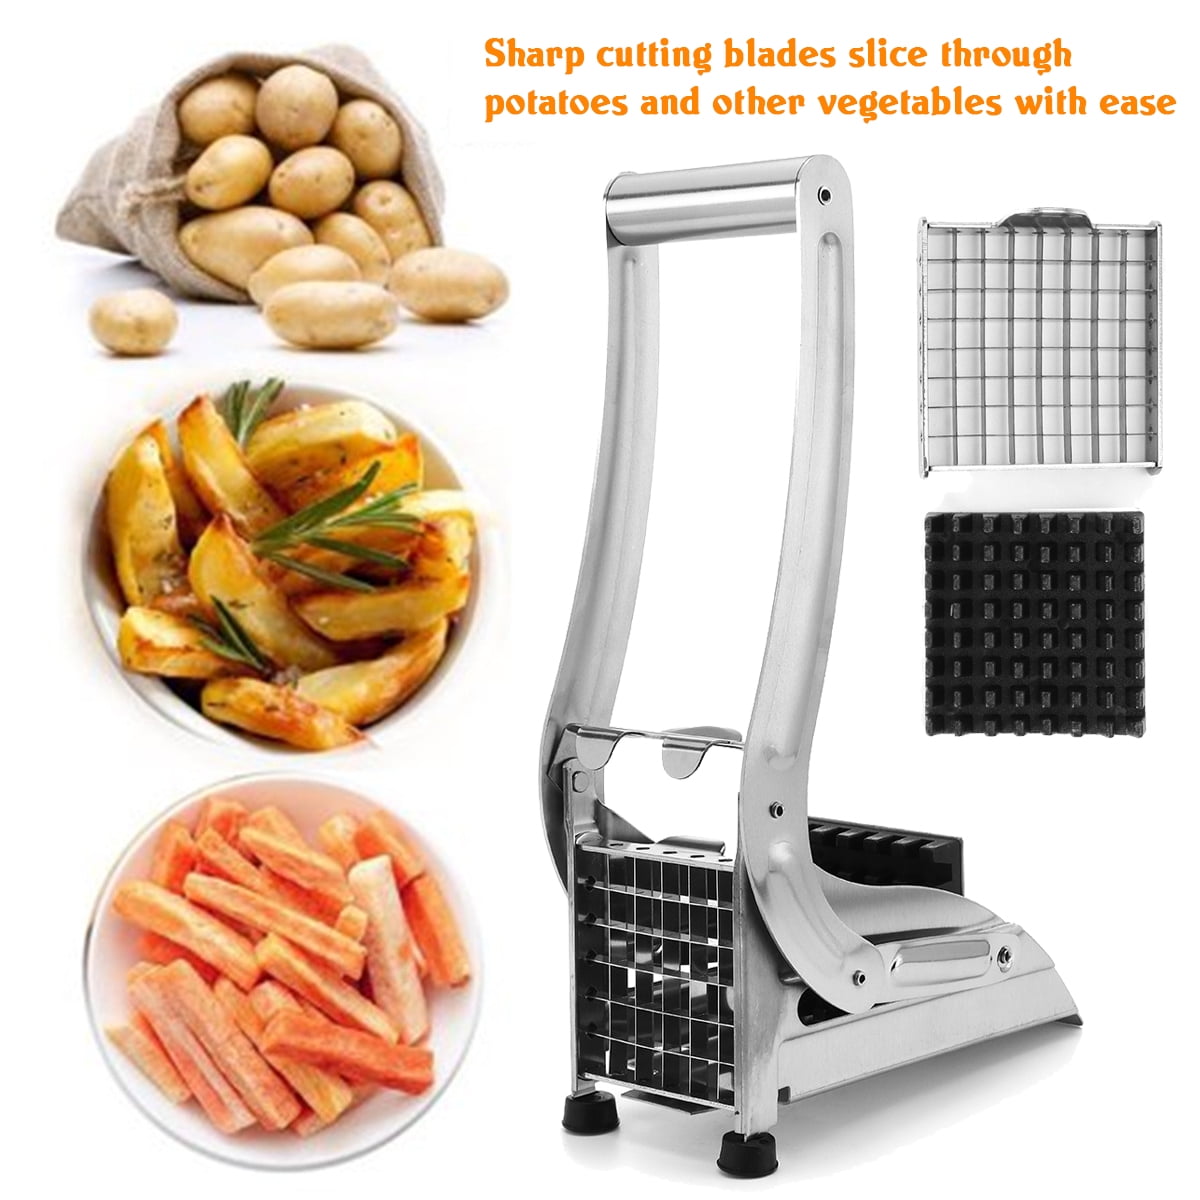 French Fries Cutter Stainless Steel Potato Chipper Chips Chopper Slicer 2 Blades